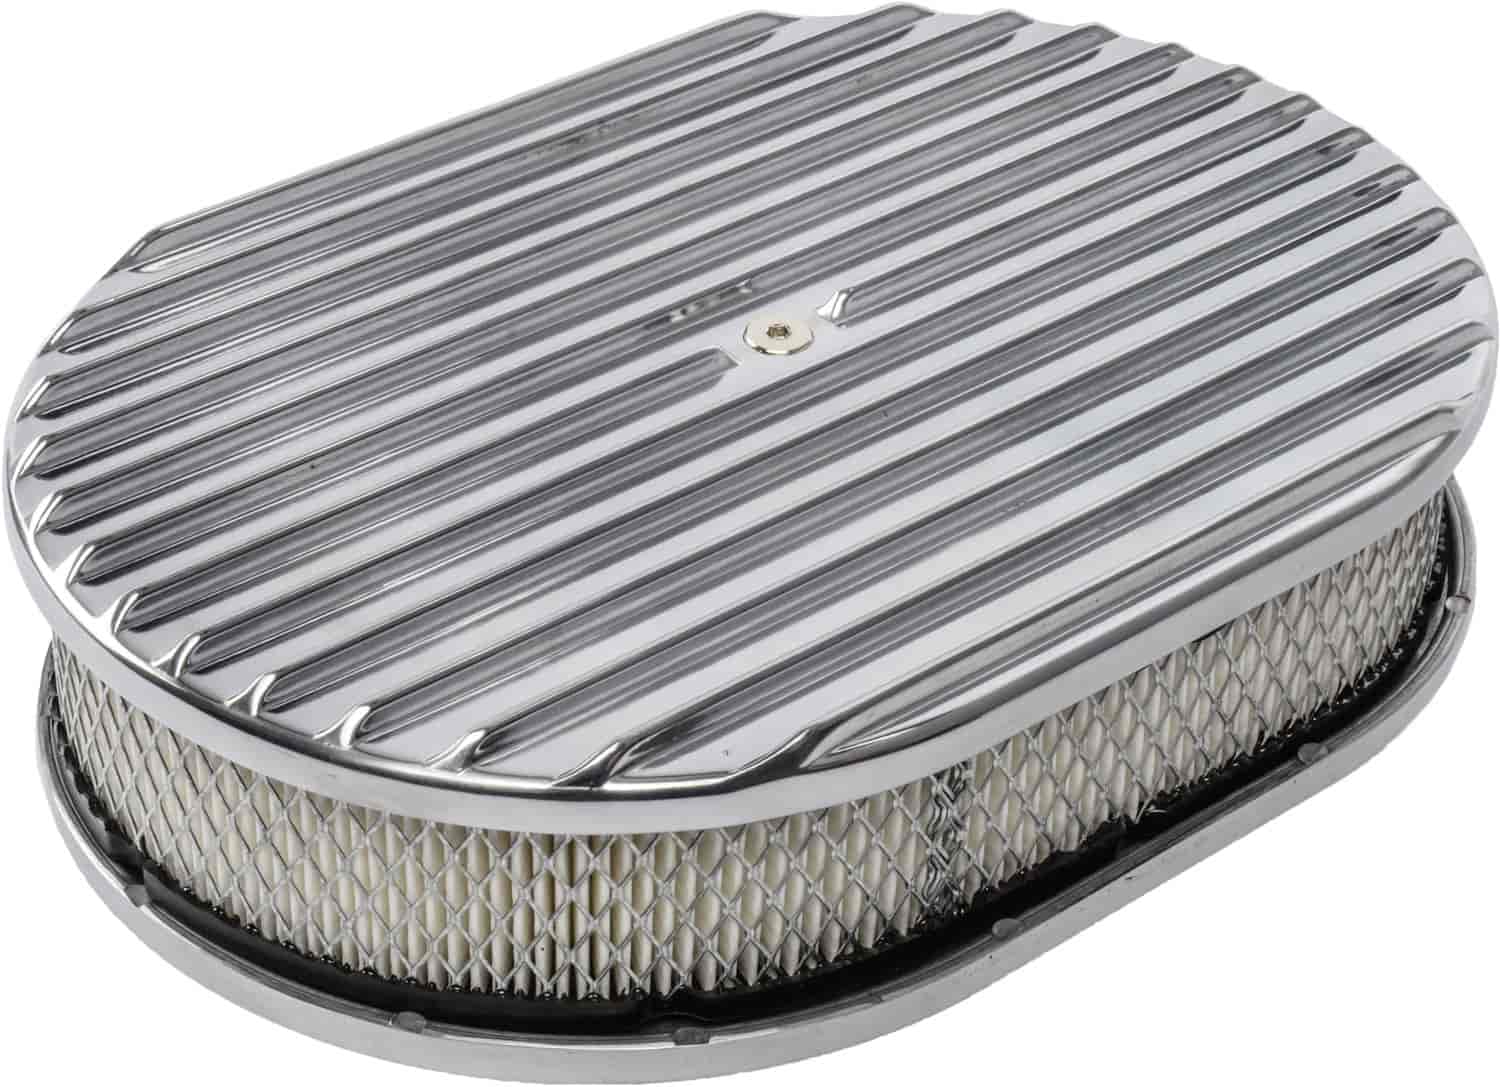 Finned Aluminum Air Cleaner Kit Oval 12 in. L x 8 1/4 in. W x 3 in. H [Polished]